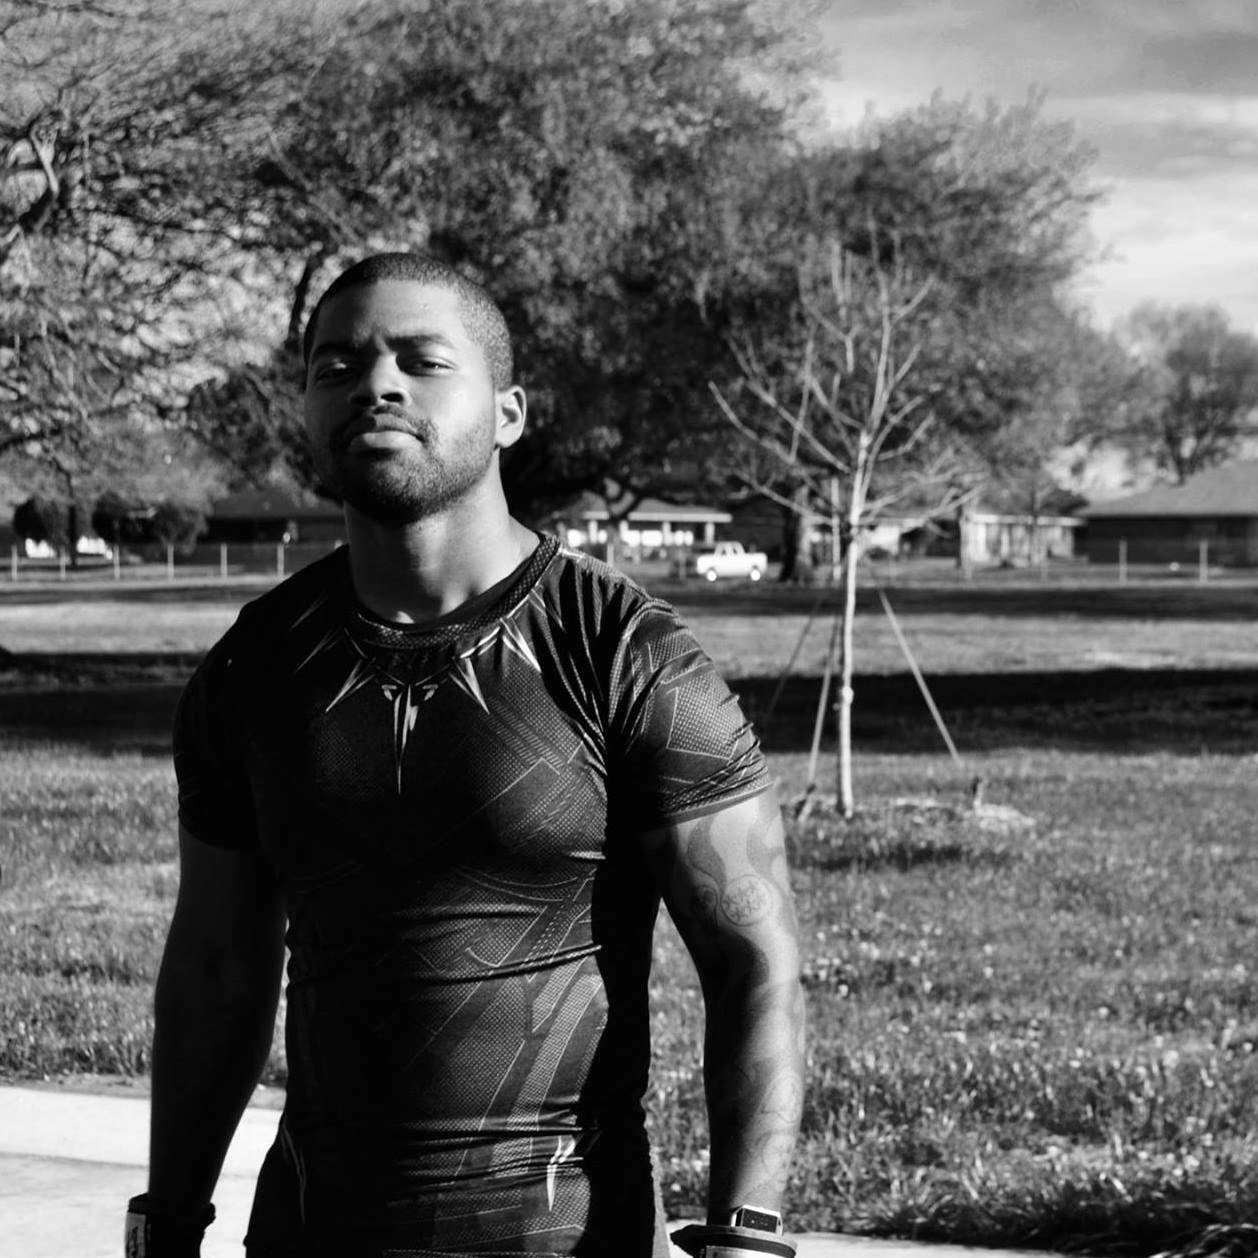 Carlton D. Personal Trainer in Baton Rouge, LA with